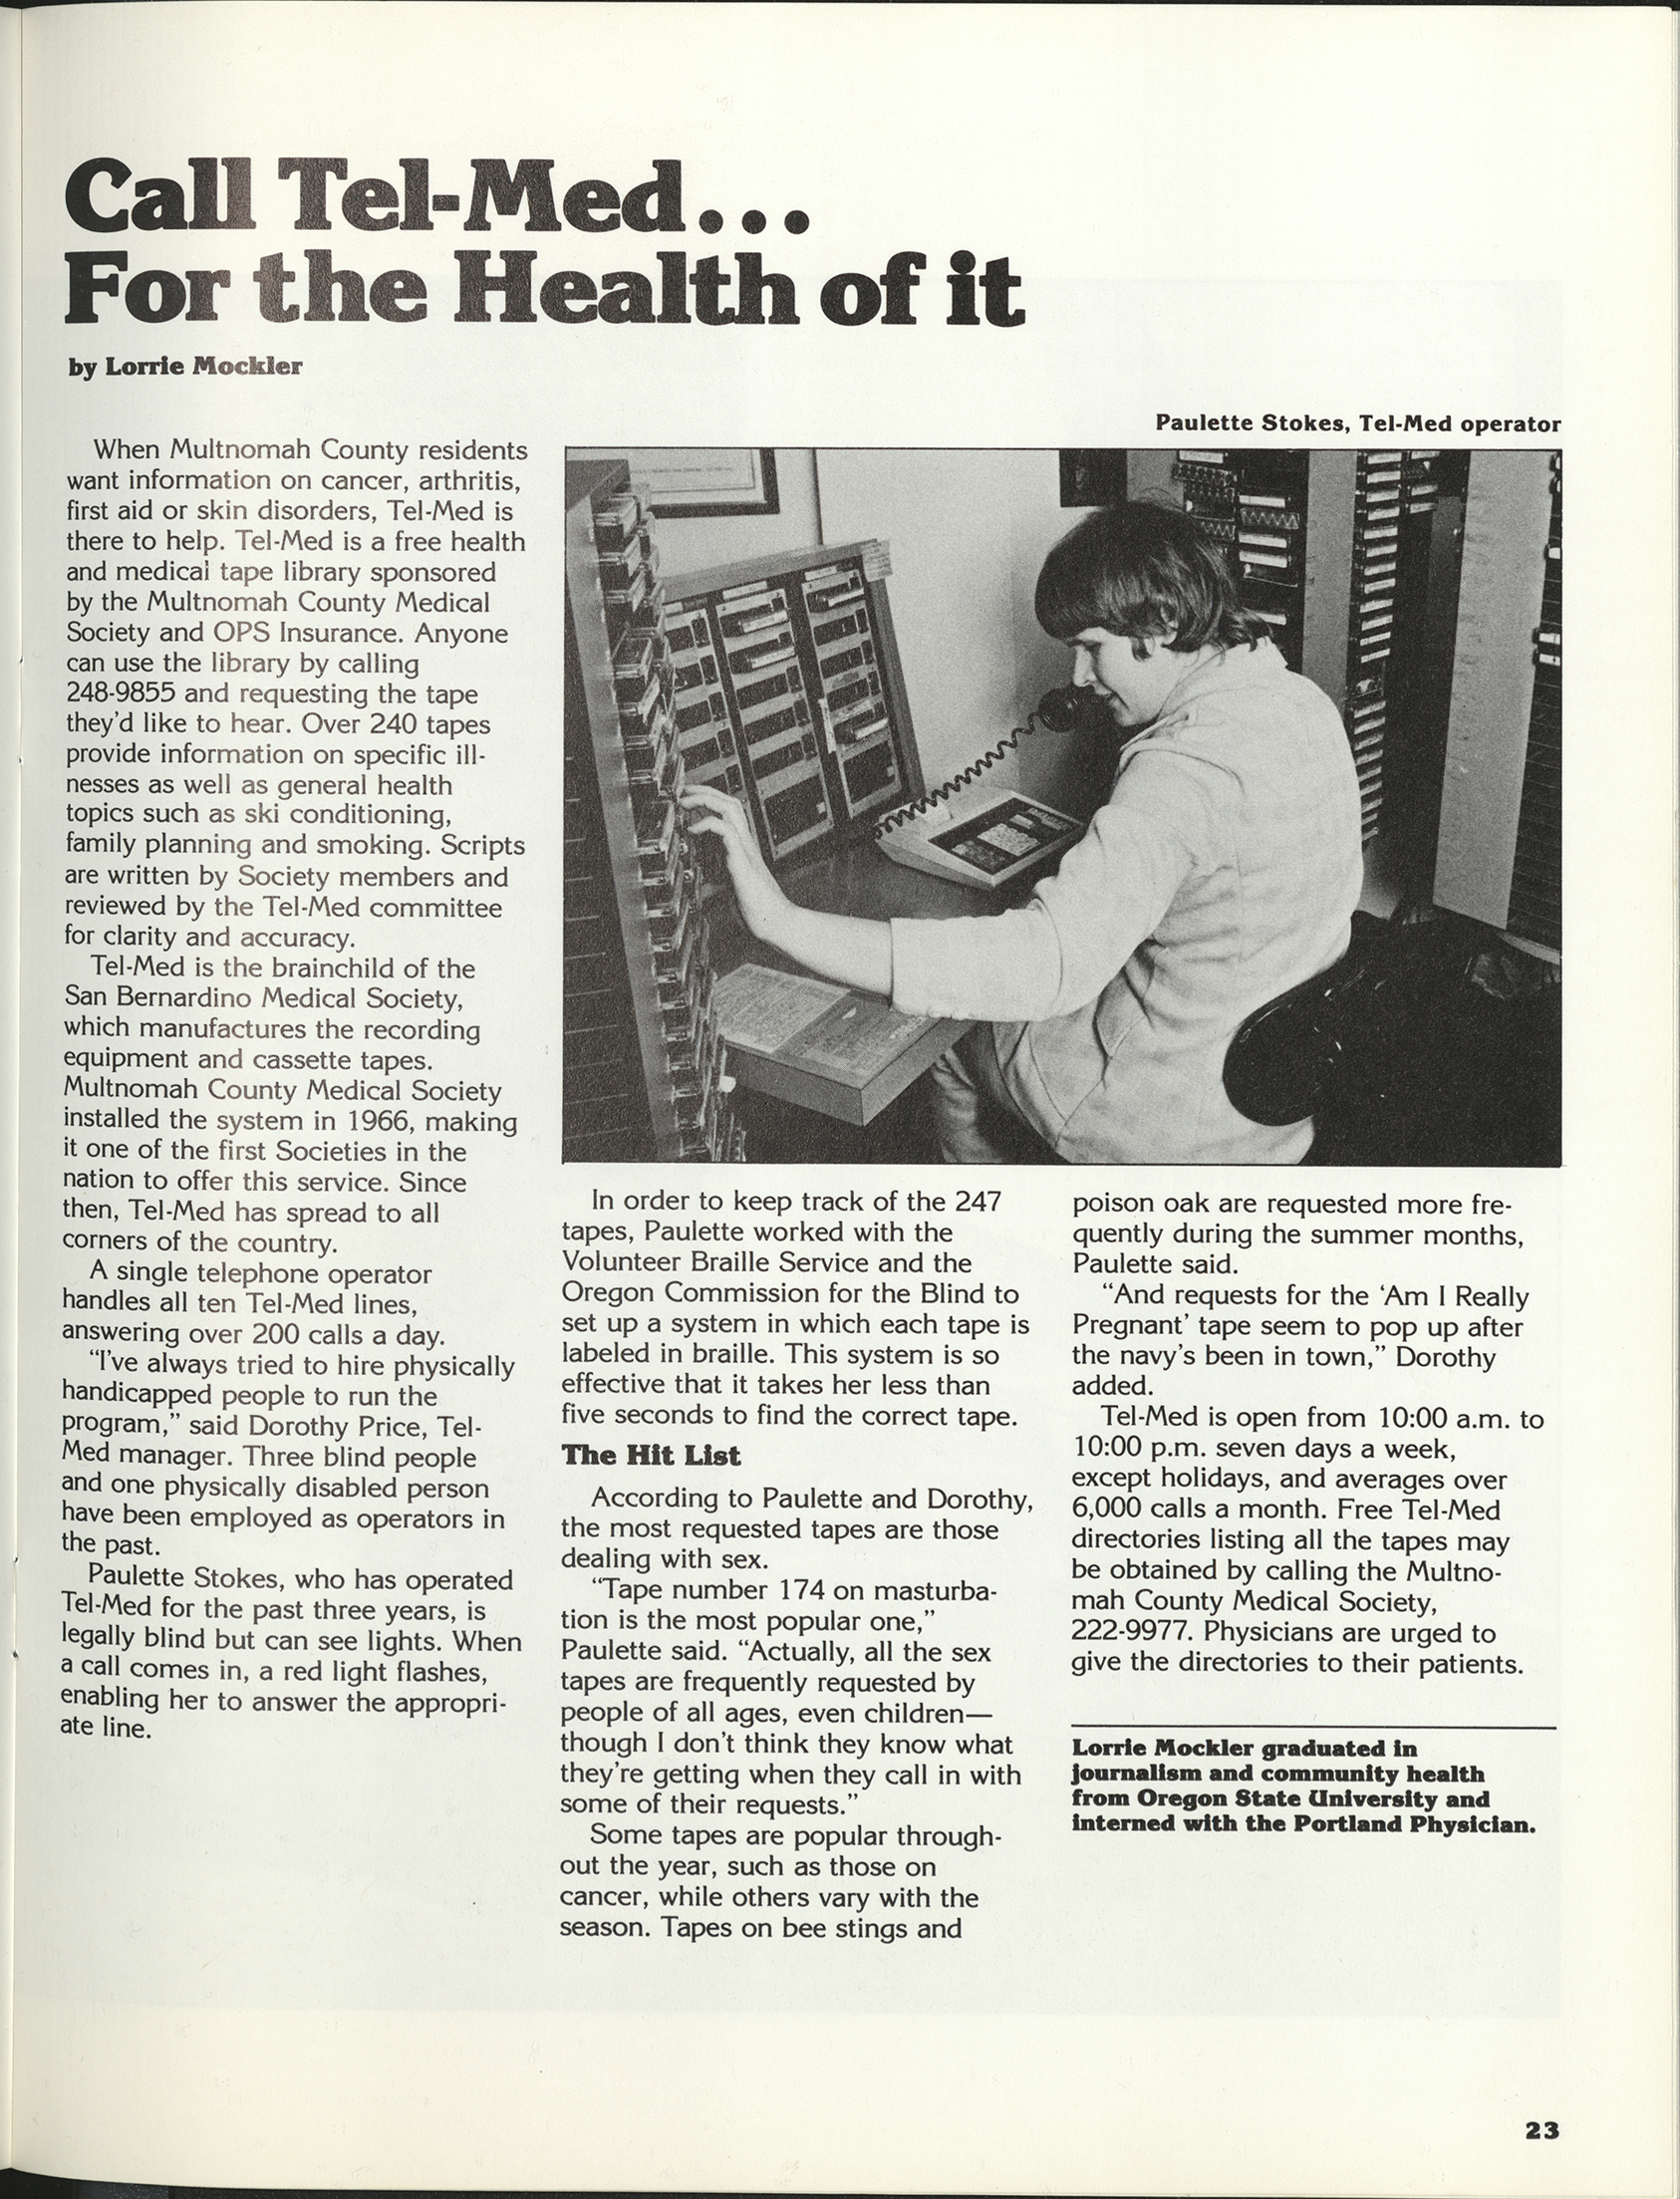 “Call Tel-Med… for the health of it” article, Portland Physician, September/October 1982. 